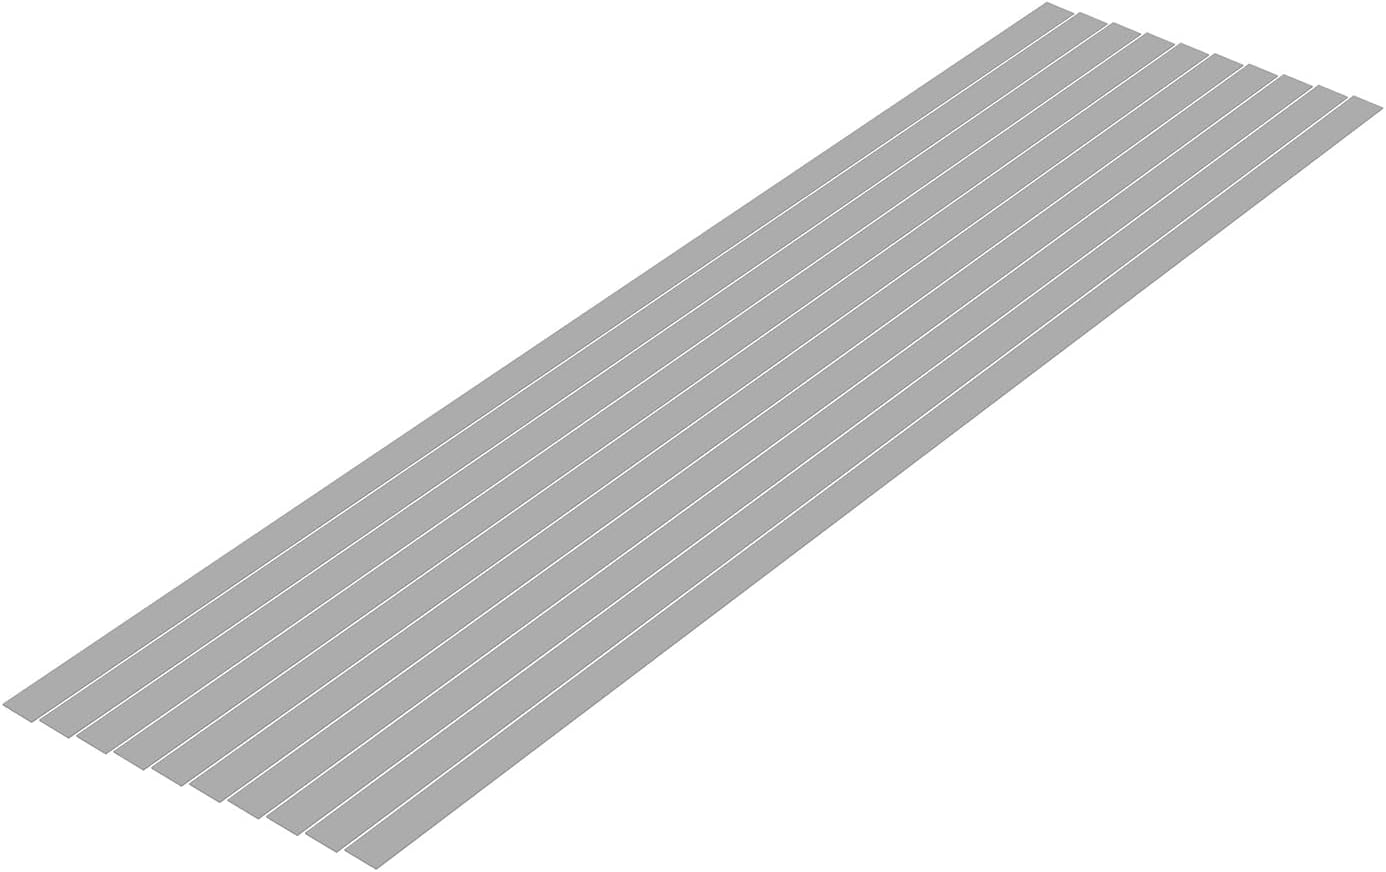 Wave Material Series OM-475 Plastic Material, Gray, Shredded Board, 0.02 x 0.2 inches (0.5 x 5.0 mm), 10 Pieces - BanzaiHobby